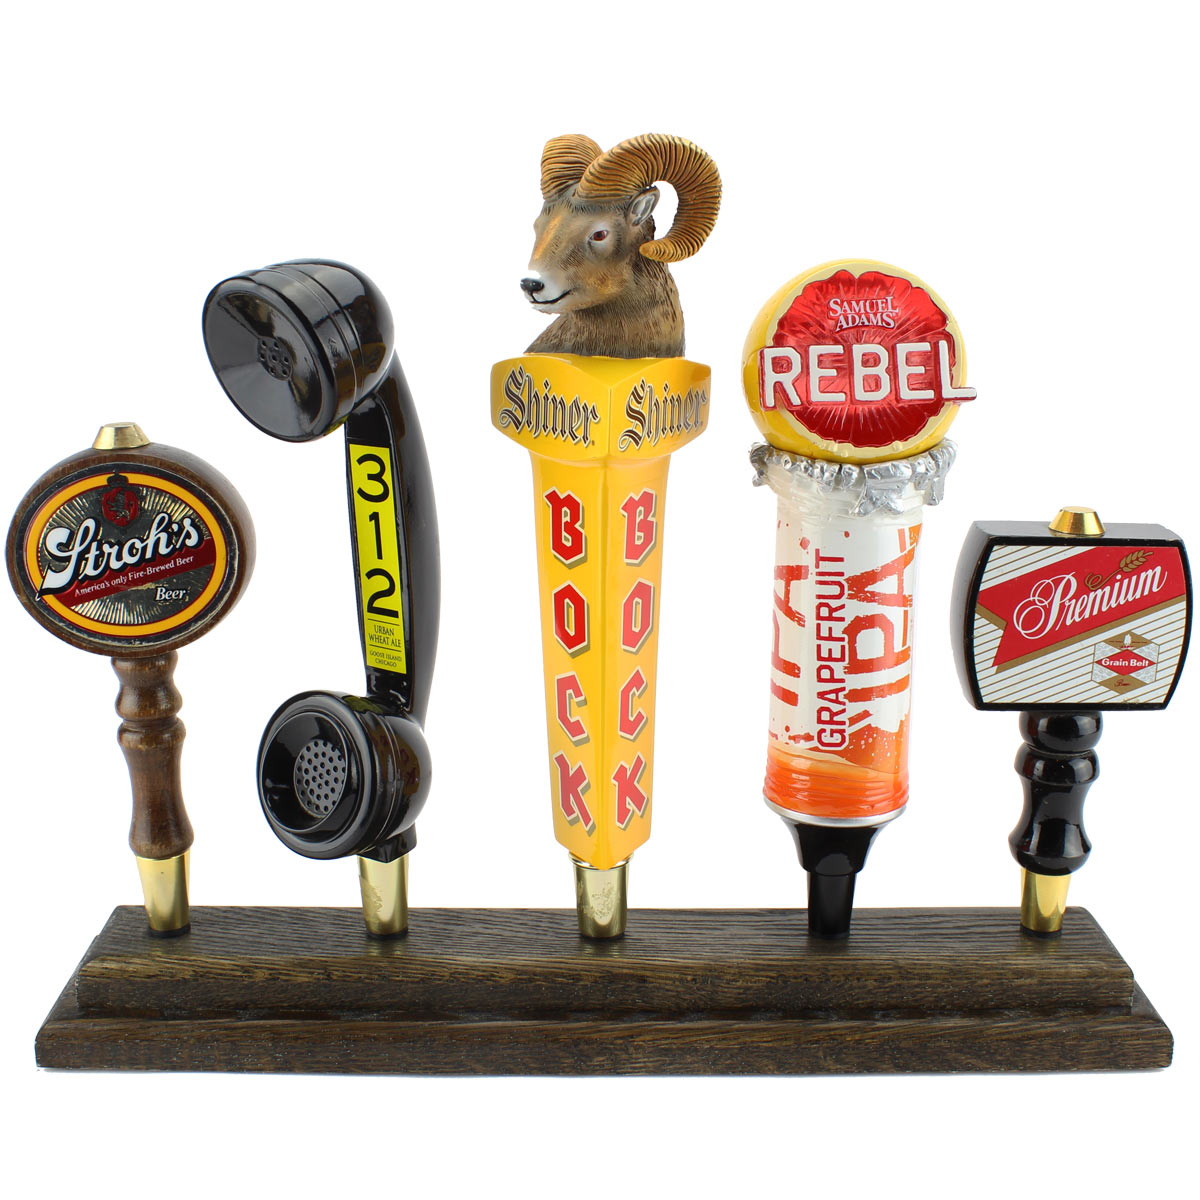 WALNUT BEER TAP HANDLE DISPLAY HOLDS 5 WALL MOUNTED 